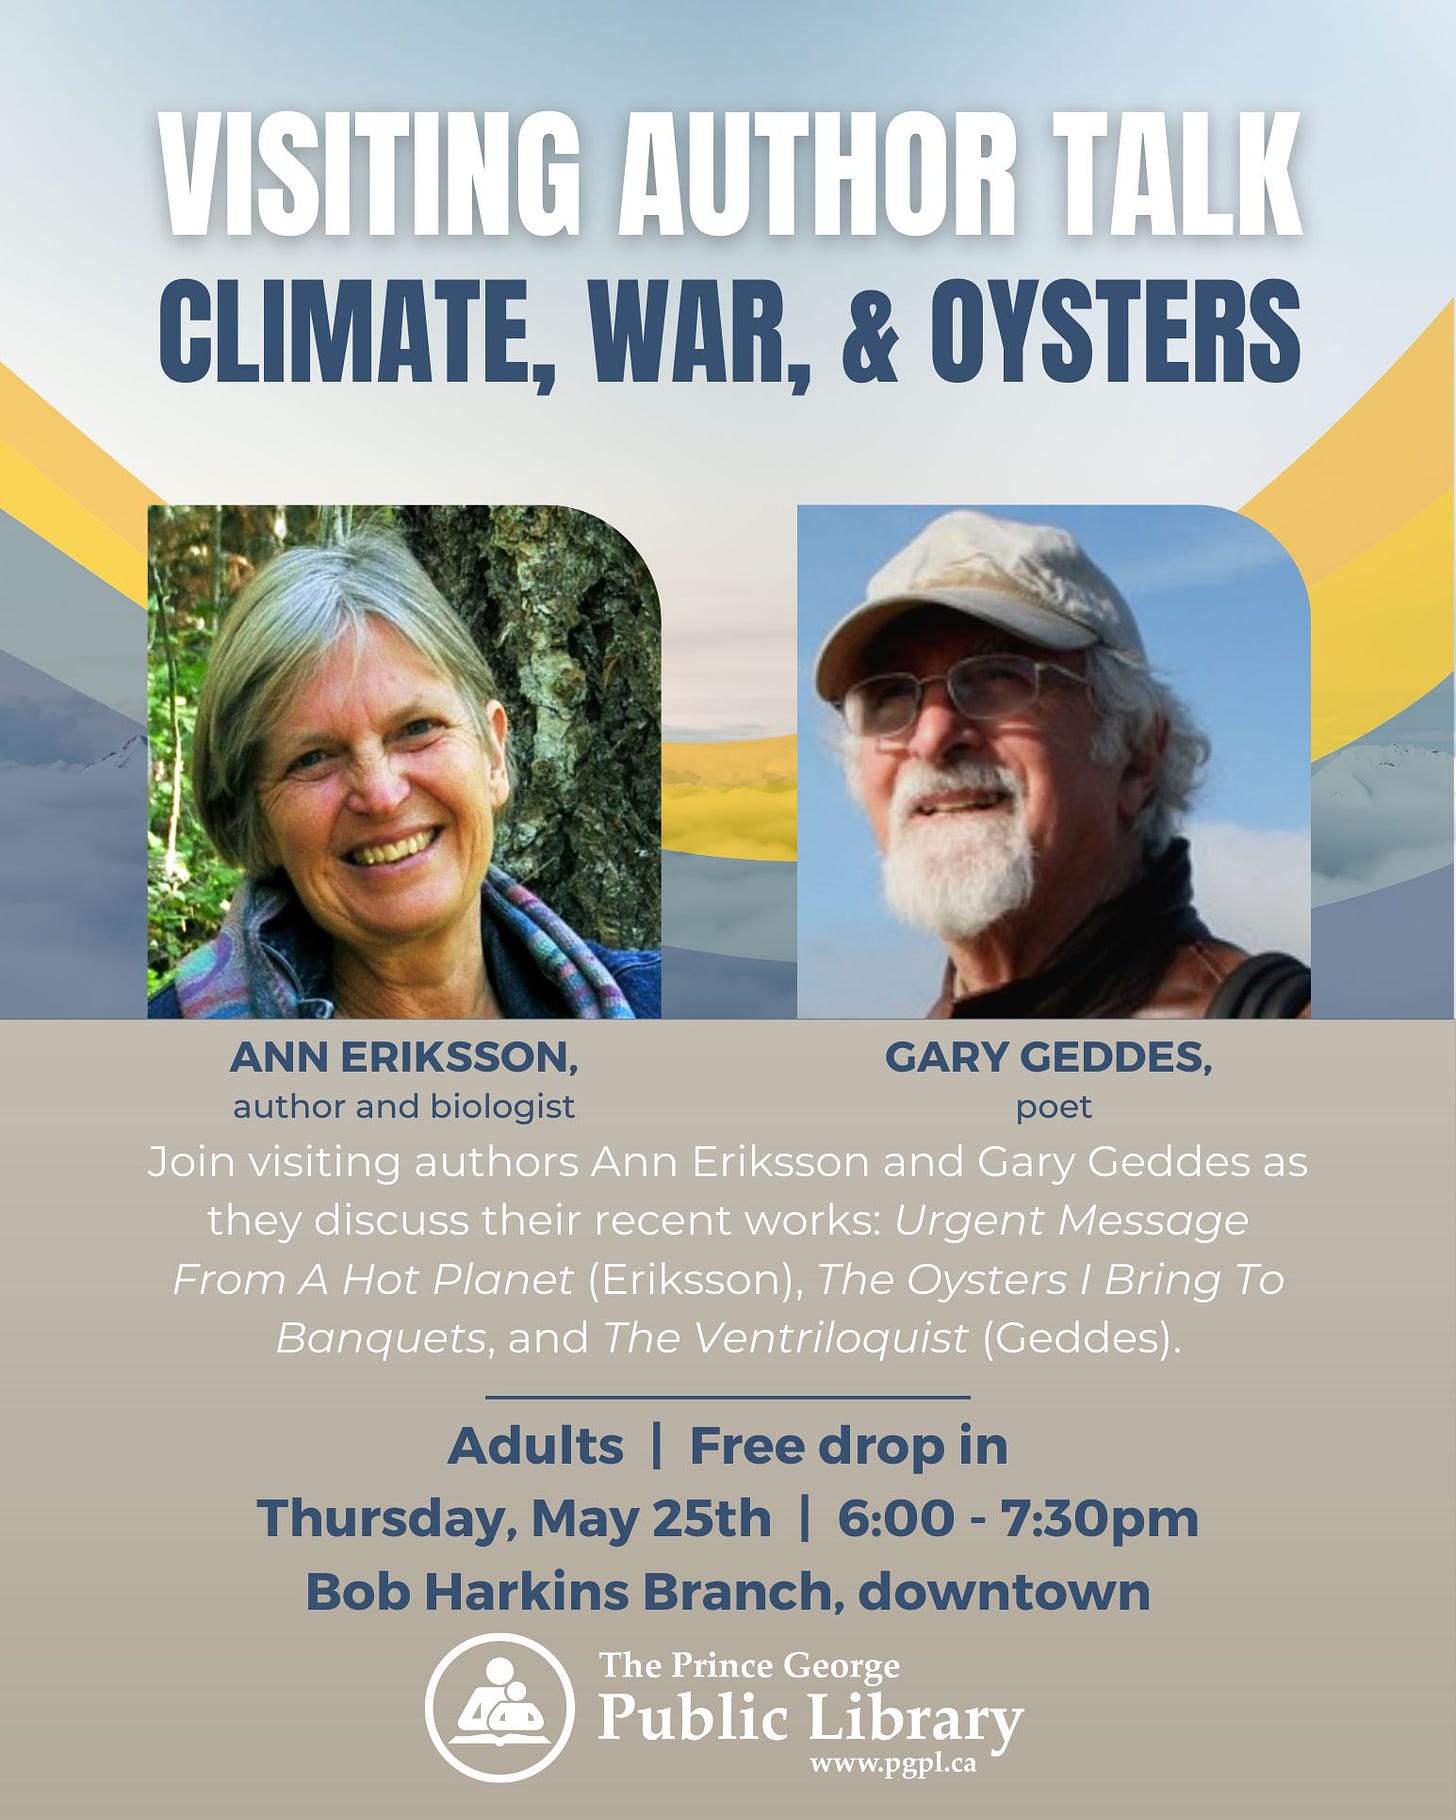 May be an image of 2 people and text that says 'VISITING AUTHOR TALK CLIMATE, WAR, & OYSTERS ANN ERIKSSON, GARY GEDDES, author and biologist poet Join visiting authors Ann Eriksson and Gary Geddes as they discuss their recent works: Urgent Message From A Hot Planet (Eriksson), The Oysters Bring Το Banquets, and The Ventriloquist (Geddes). Adults Free drop in Thursday, May 25th 6:00- 7:30pm Bob Harkins Branch, downtown The Prince George Public Library www.pgpl.ca'